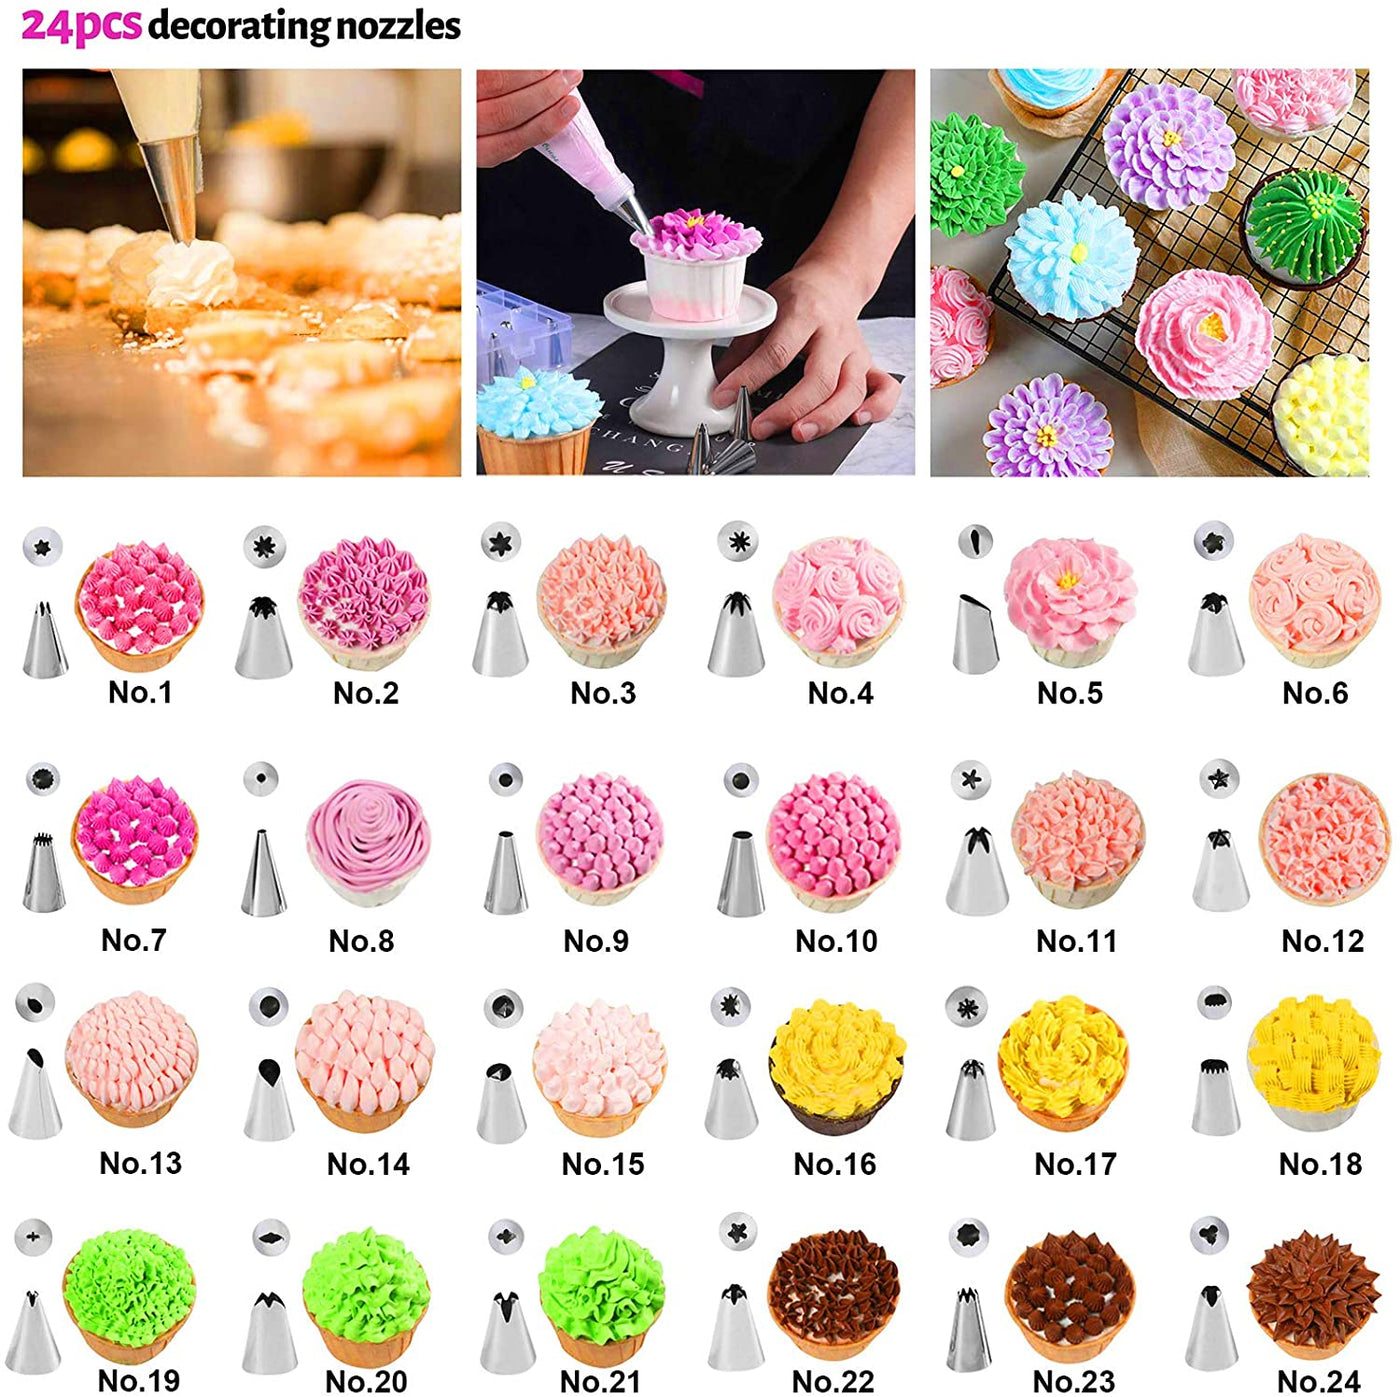 Cheer Collection Cake Decorating Supplies Kit - Cheer Collection